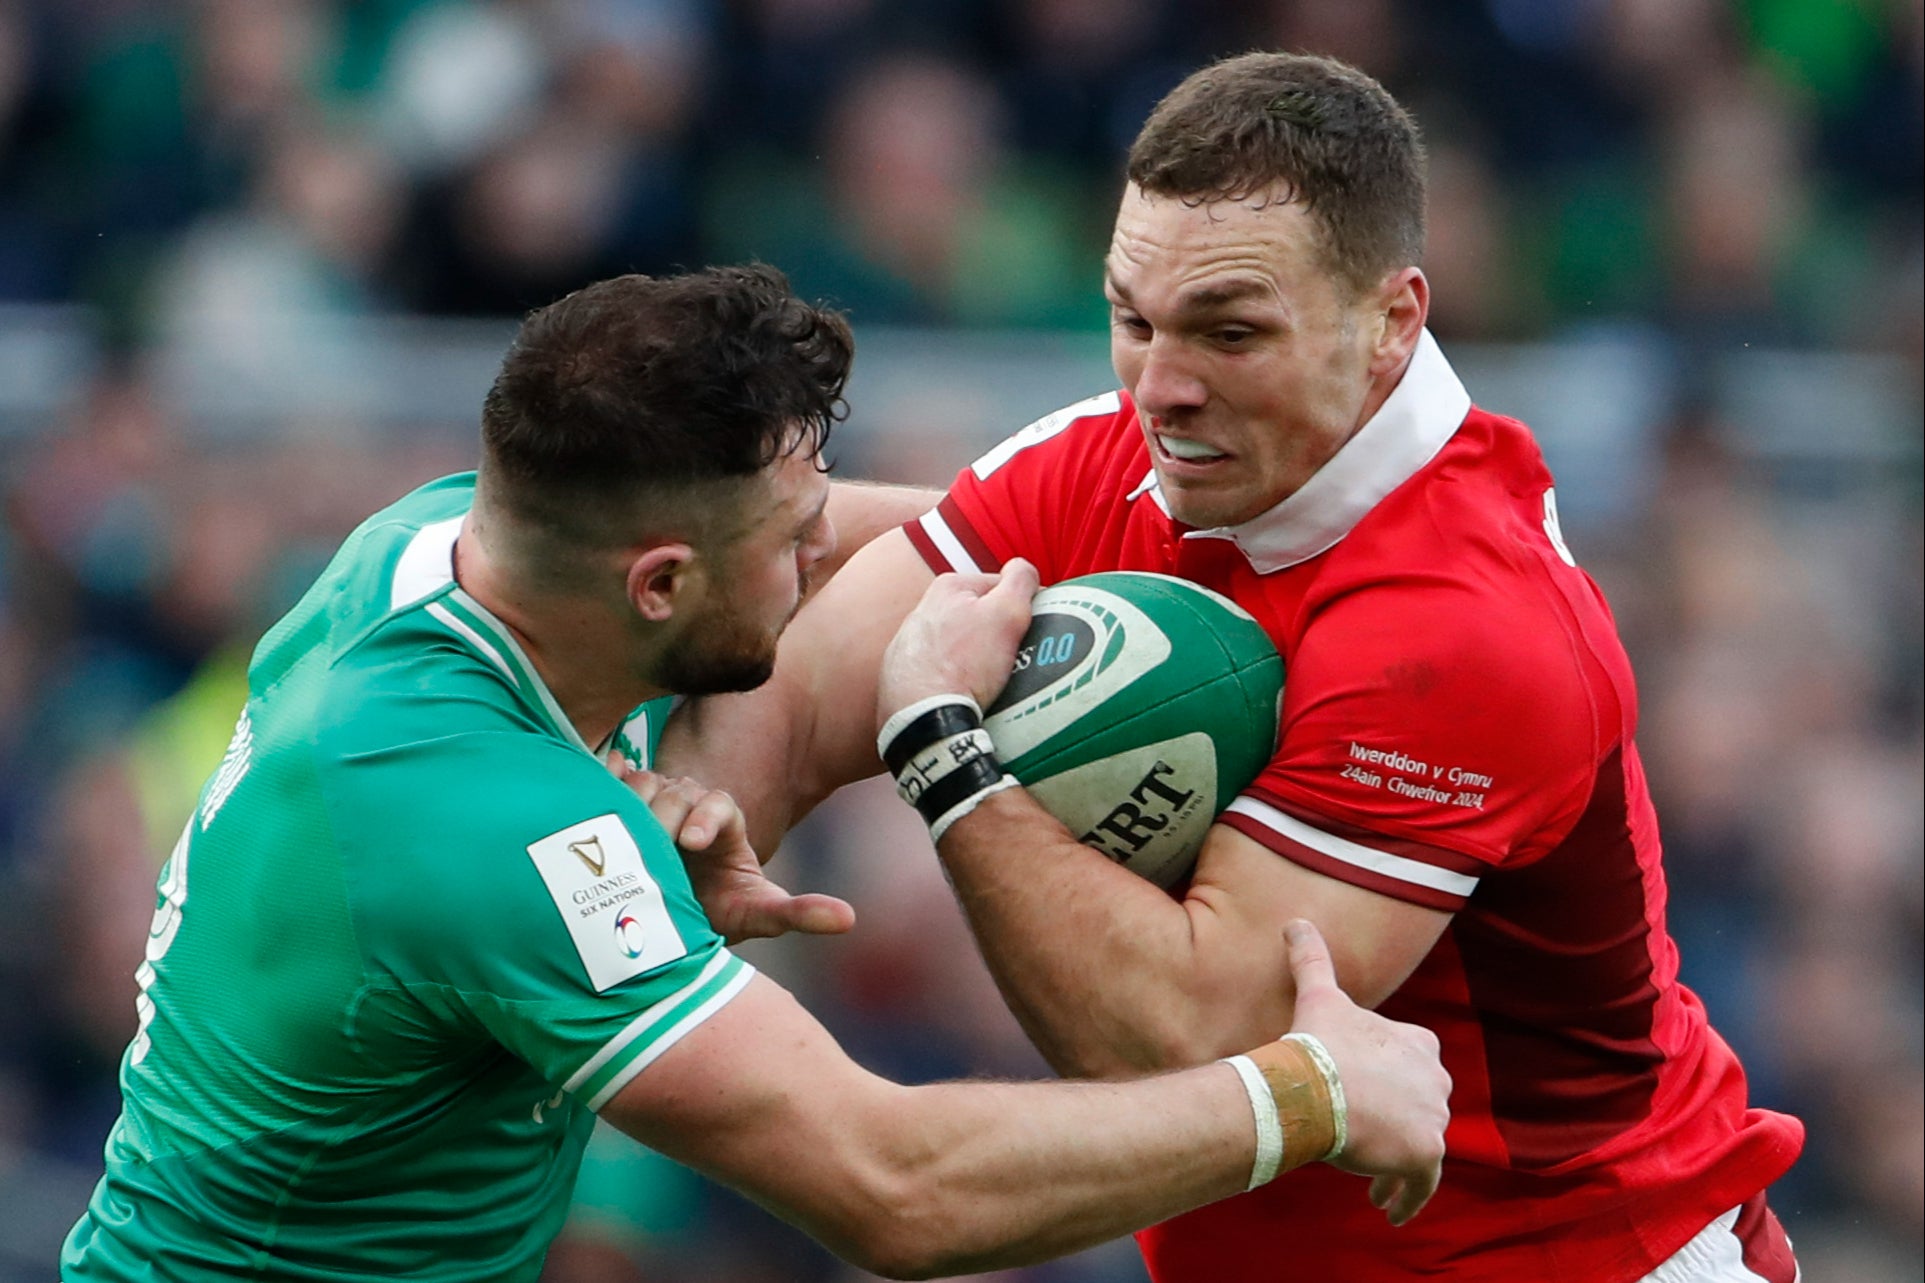 George North has been dropped for the France clash